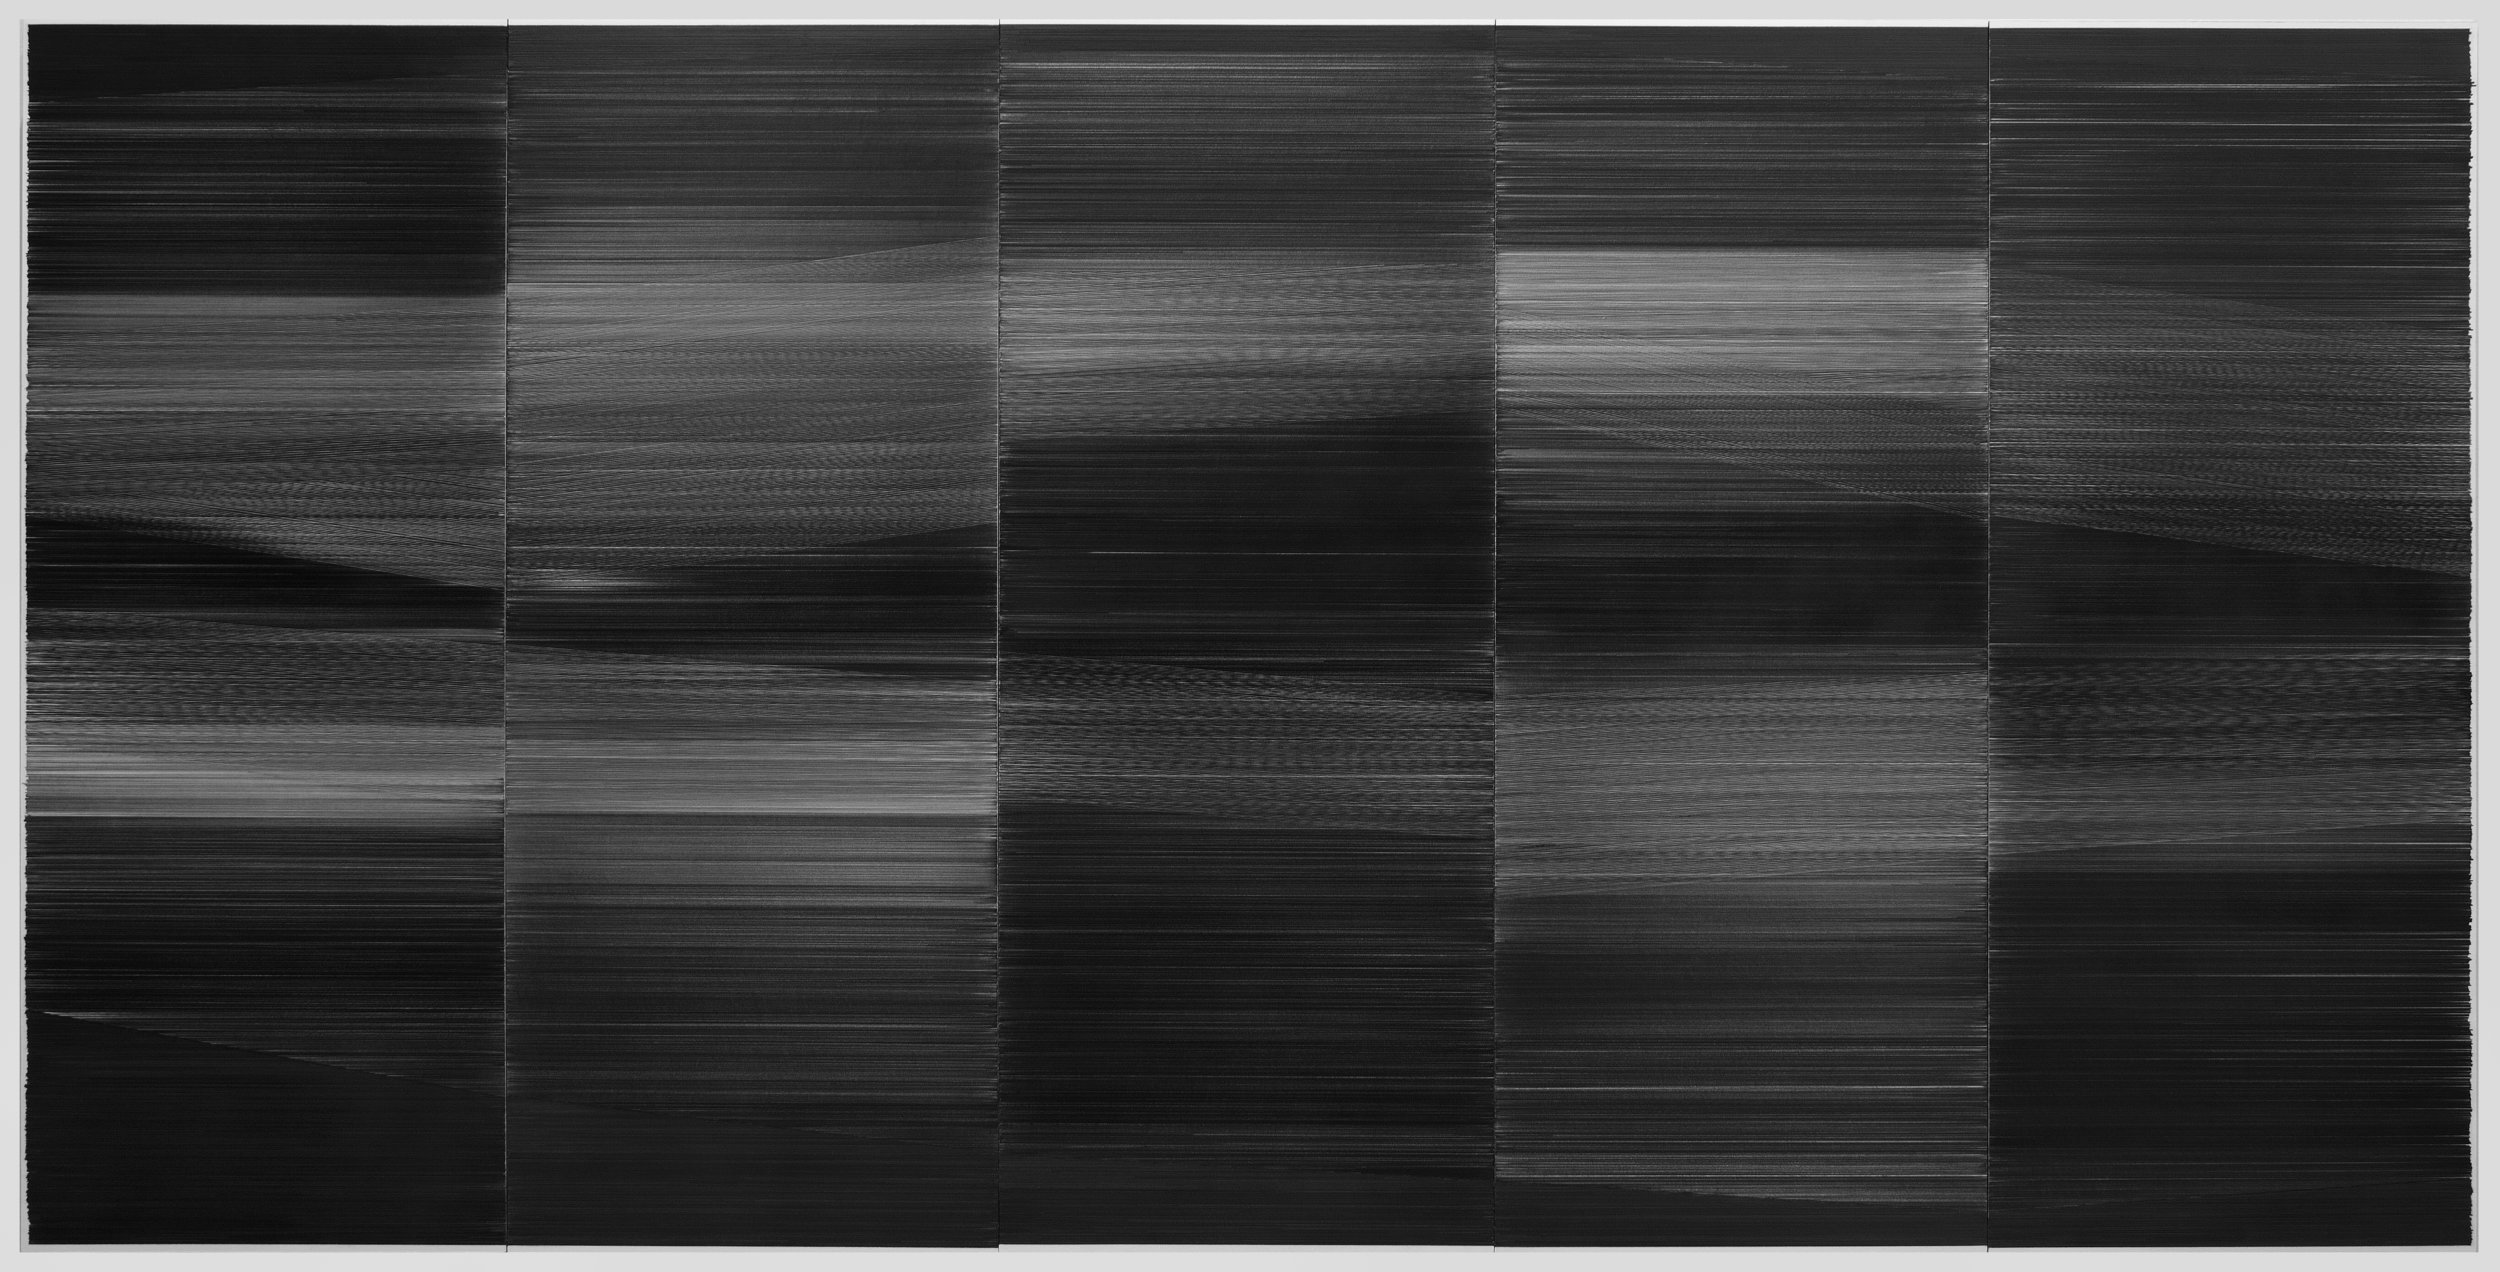    field drawing 04   2016 graphite on mat board, integrated wood frame 60 x 120 x 3 inches 